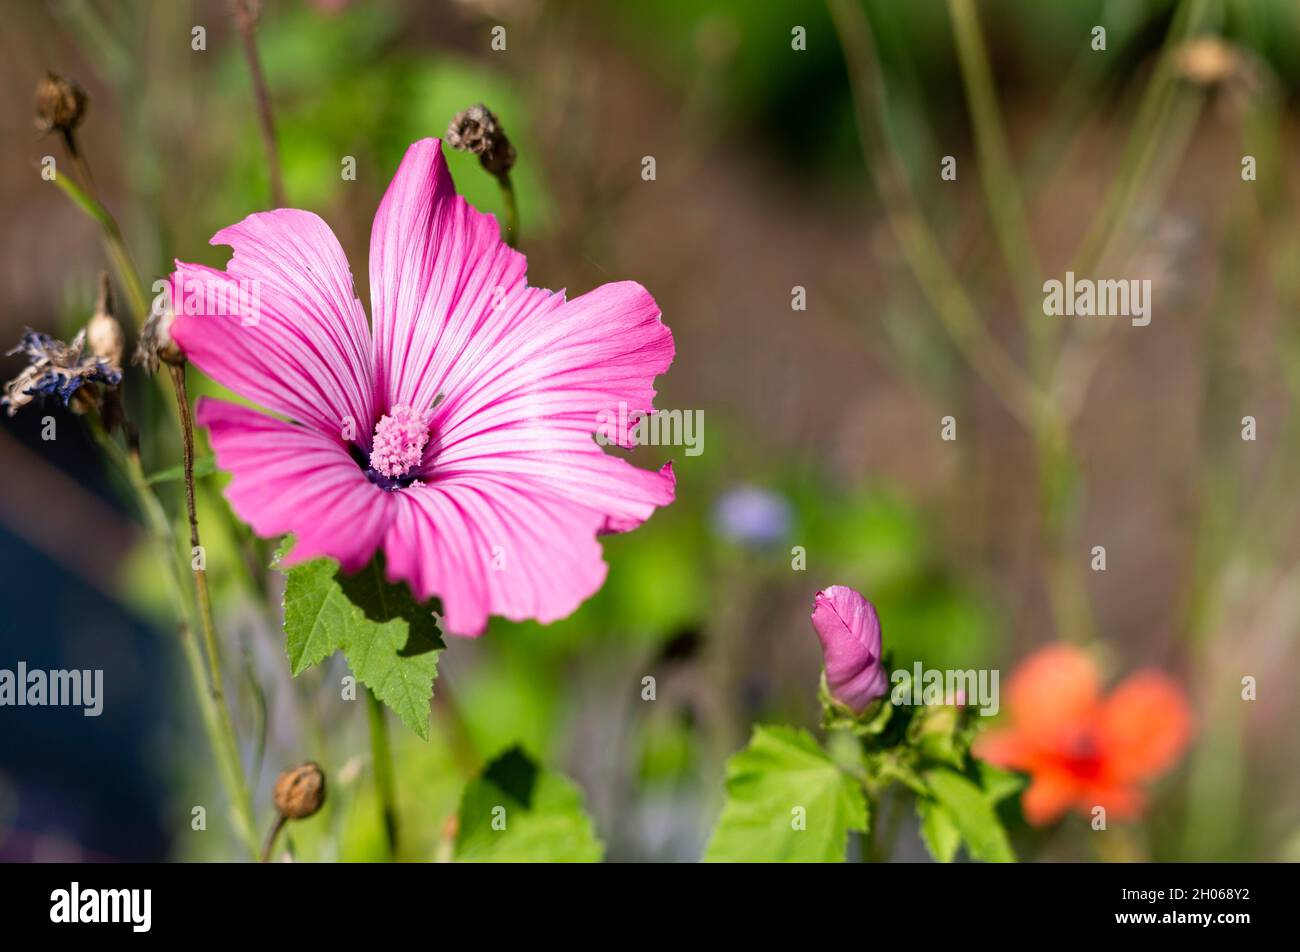 The photo shows various blooming summer flowers in the sunlight Stock Photo